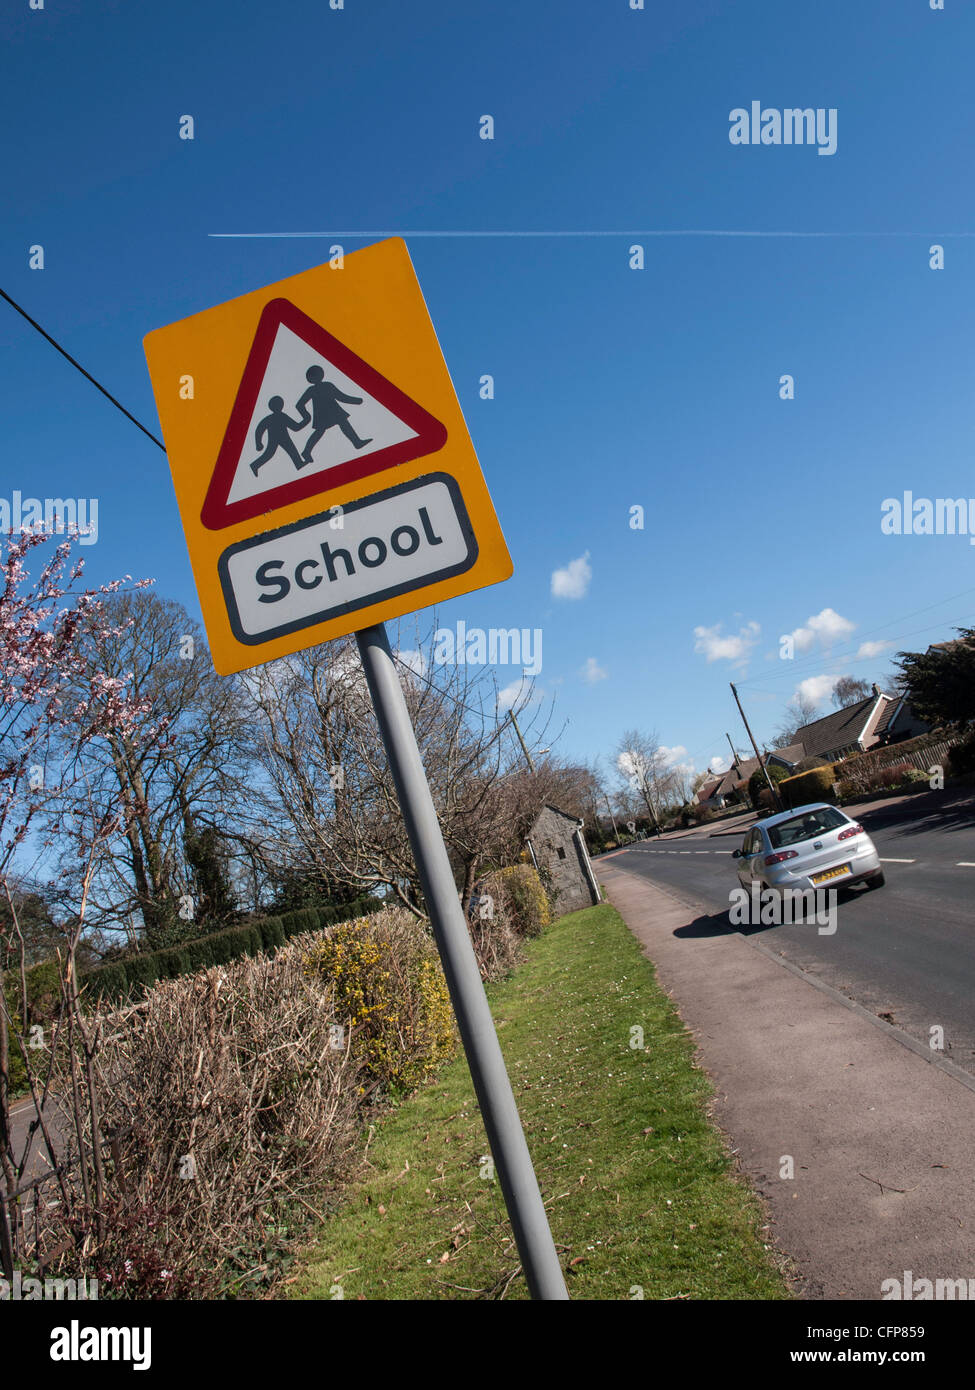 Sign warning of school ahead on country road in Gloucestershire England UK with car on road. Stock Photo